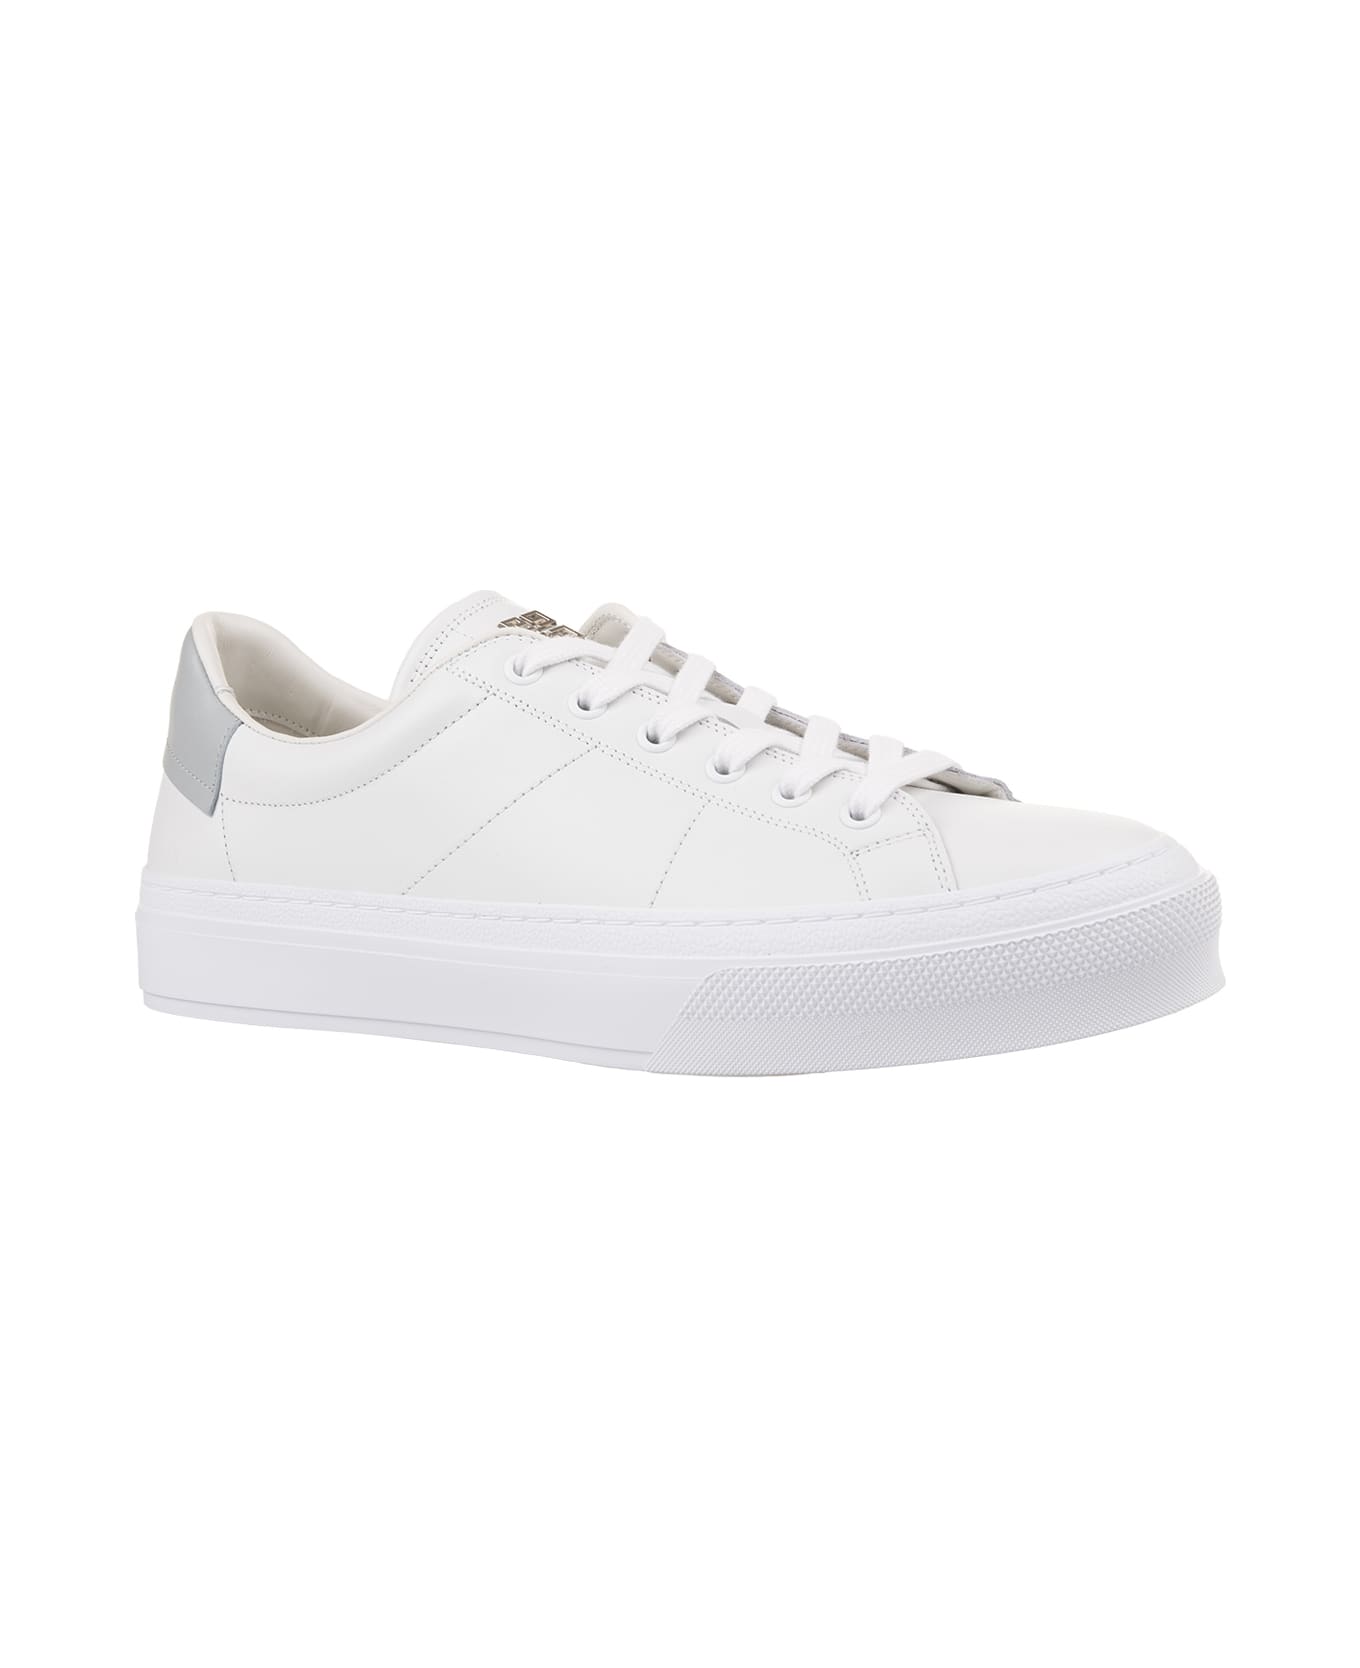 Givenchy White/grey Leather City Sport Sneakers - White